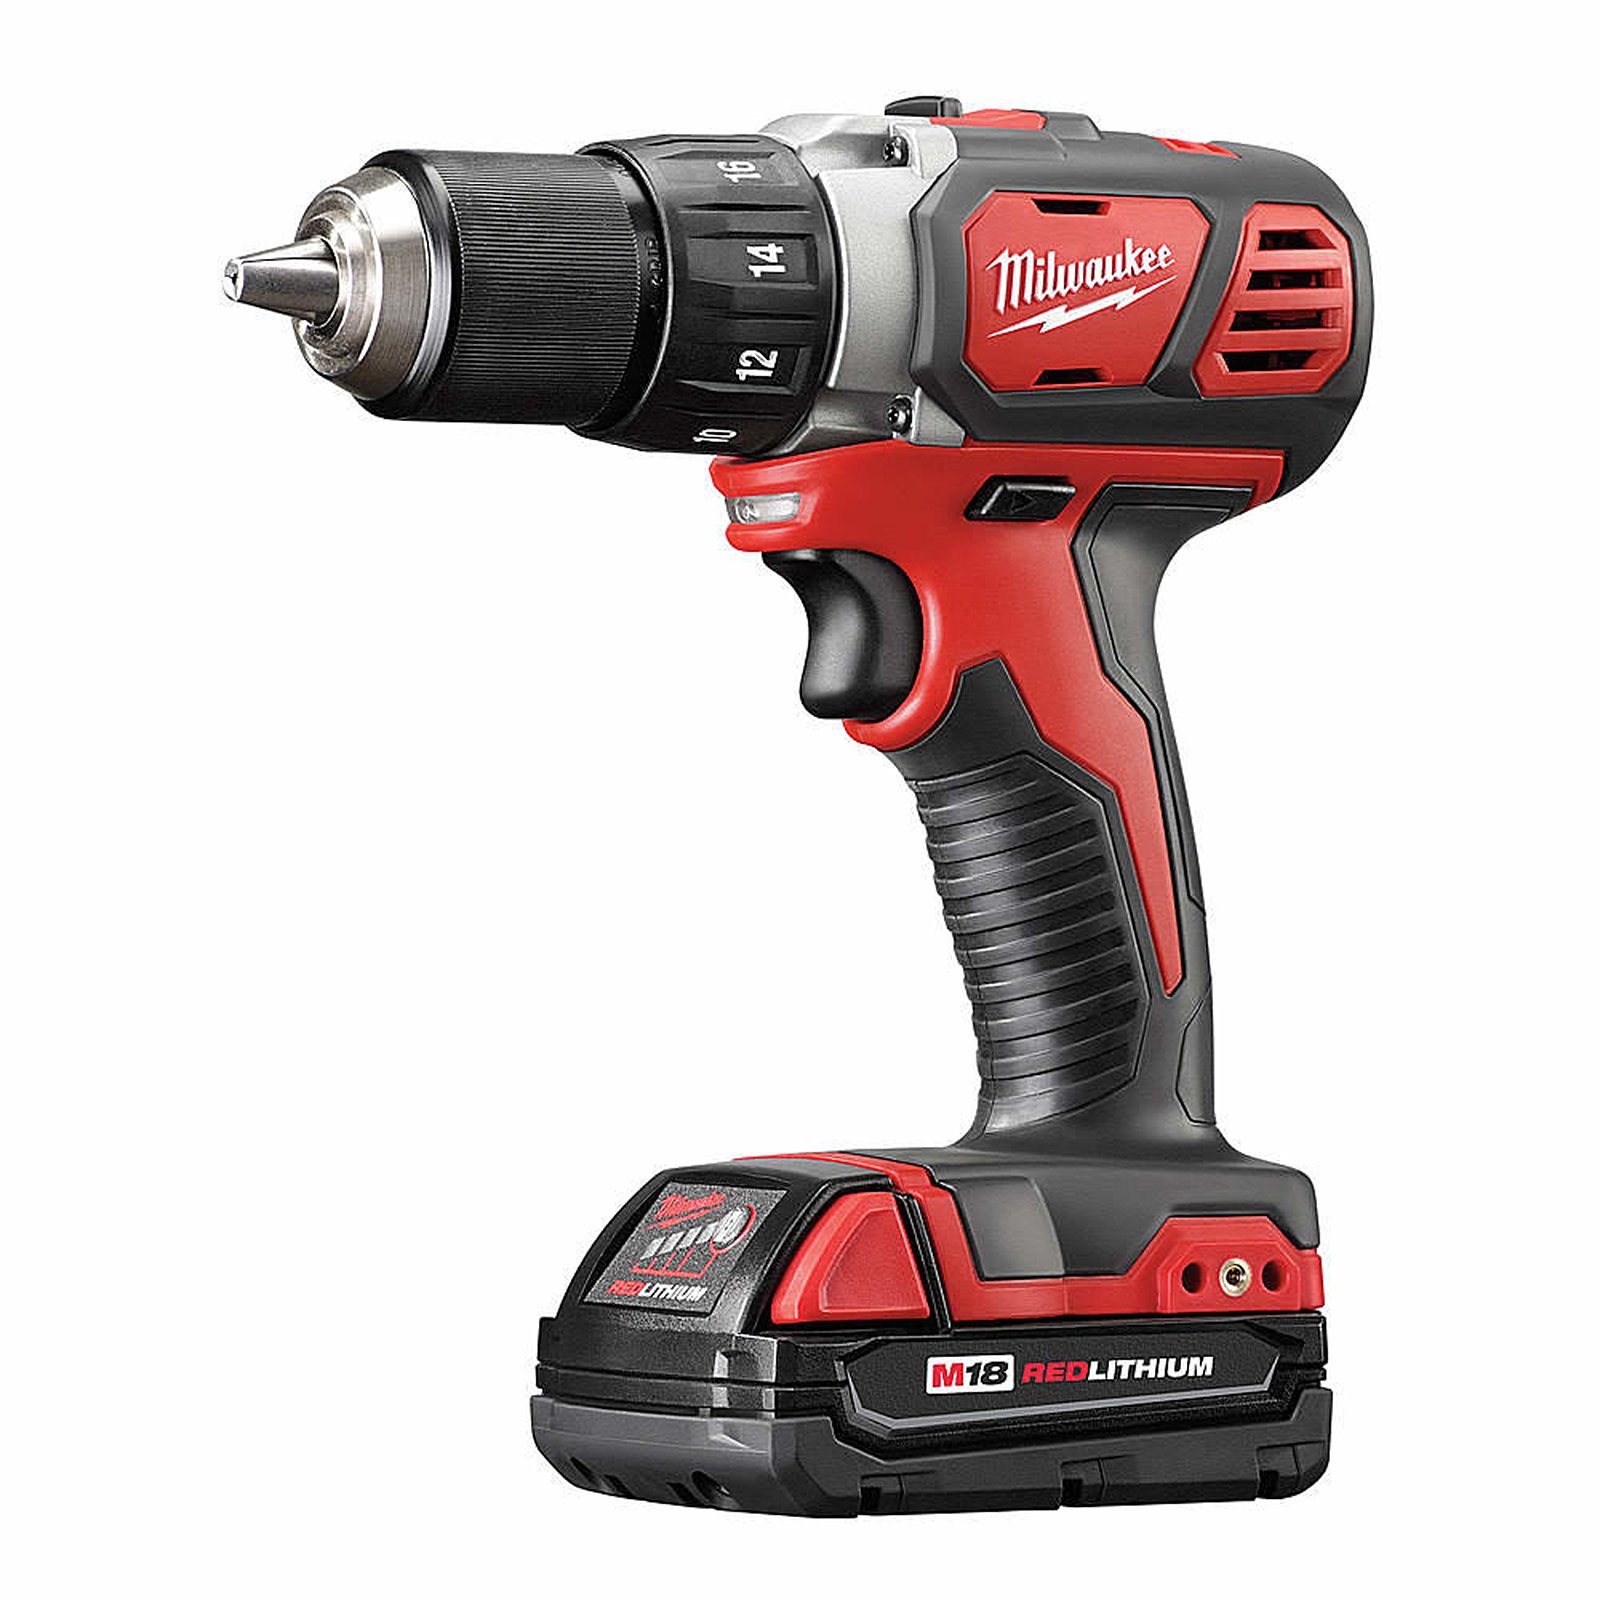 Milwaukee 2606-22CT 18V 1/2in. Compact Drill/Driver Kit with  Battery, Charger and Case